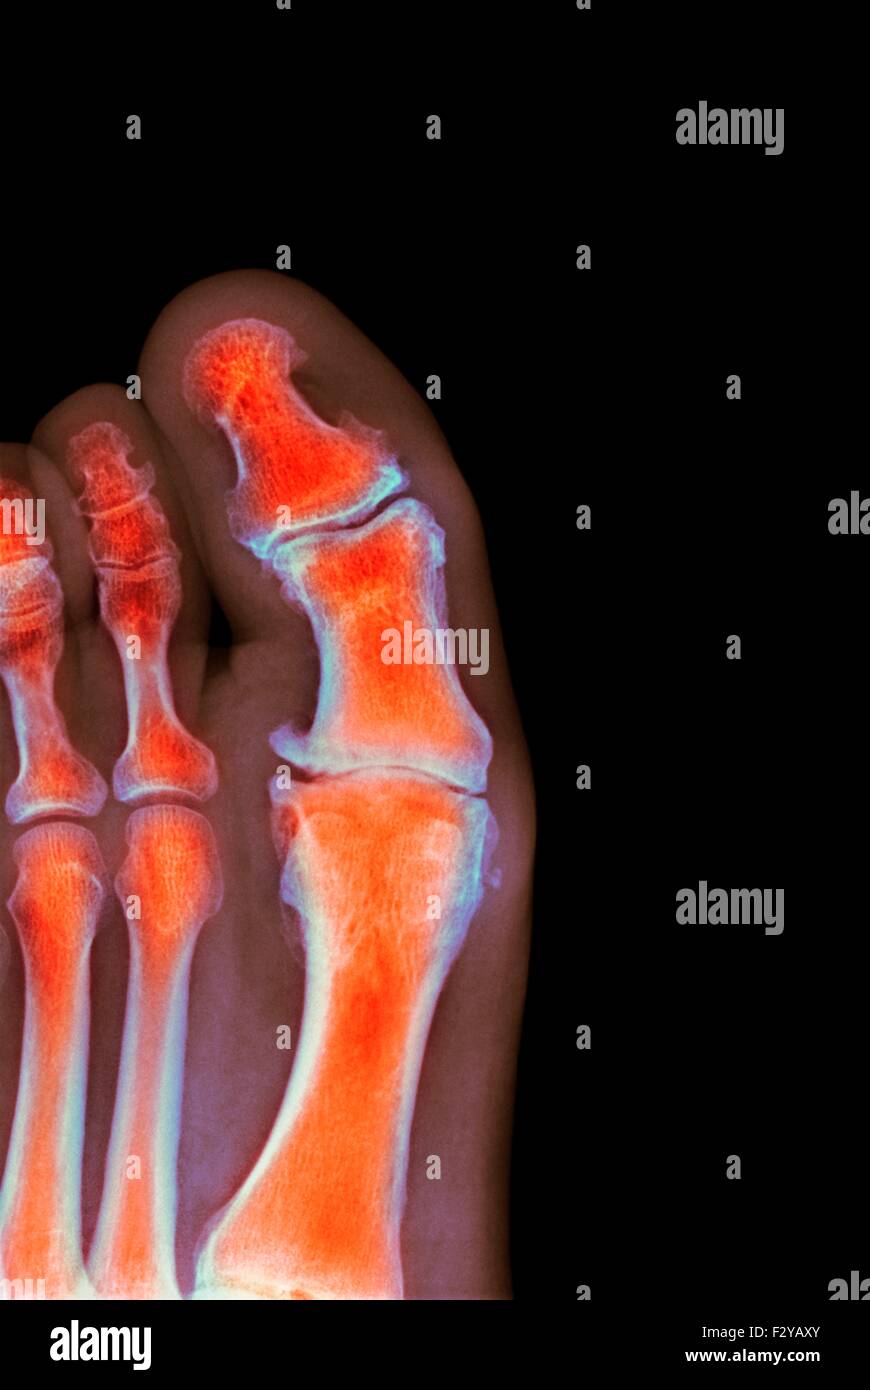 Foot Bones X Rays High Resolution Stock Photography And Images Alamy